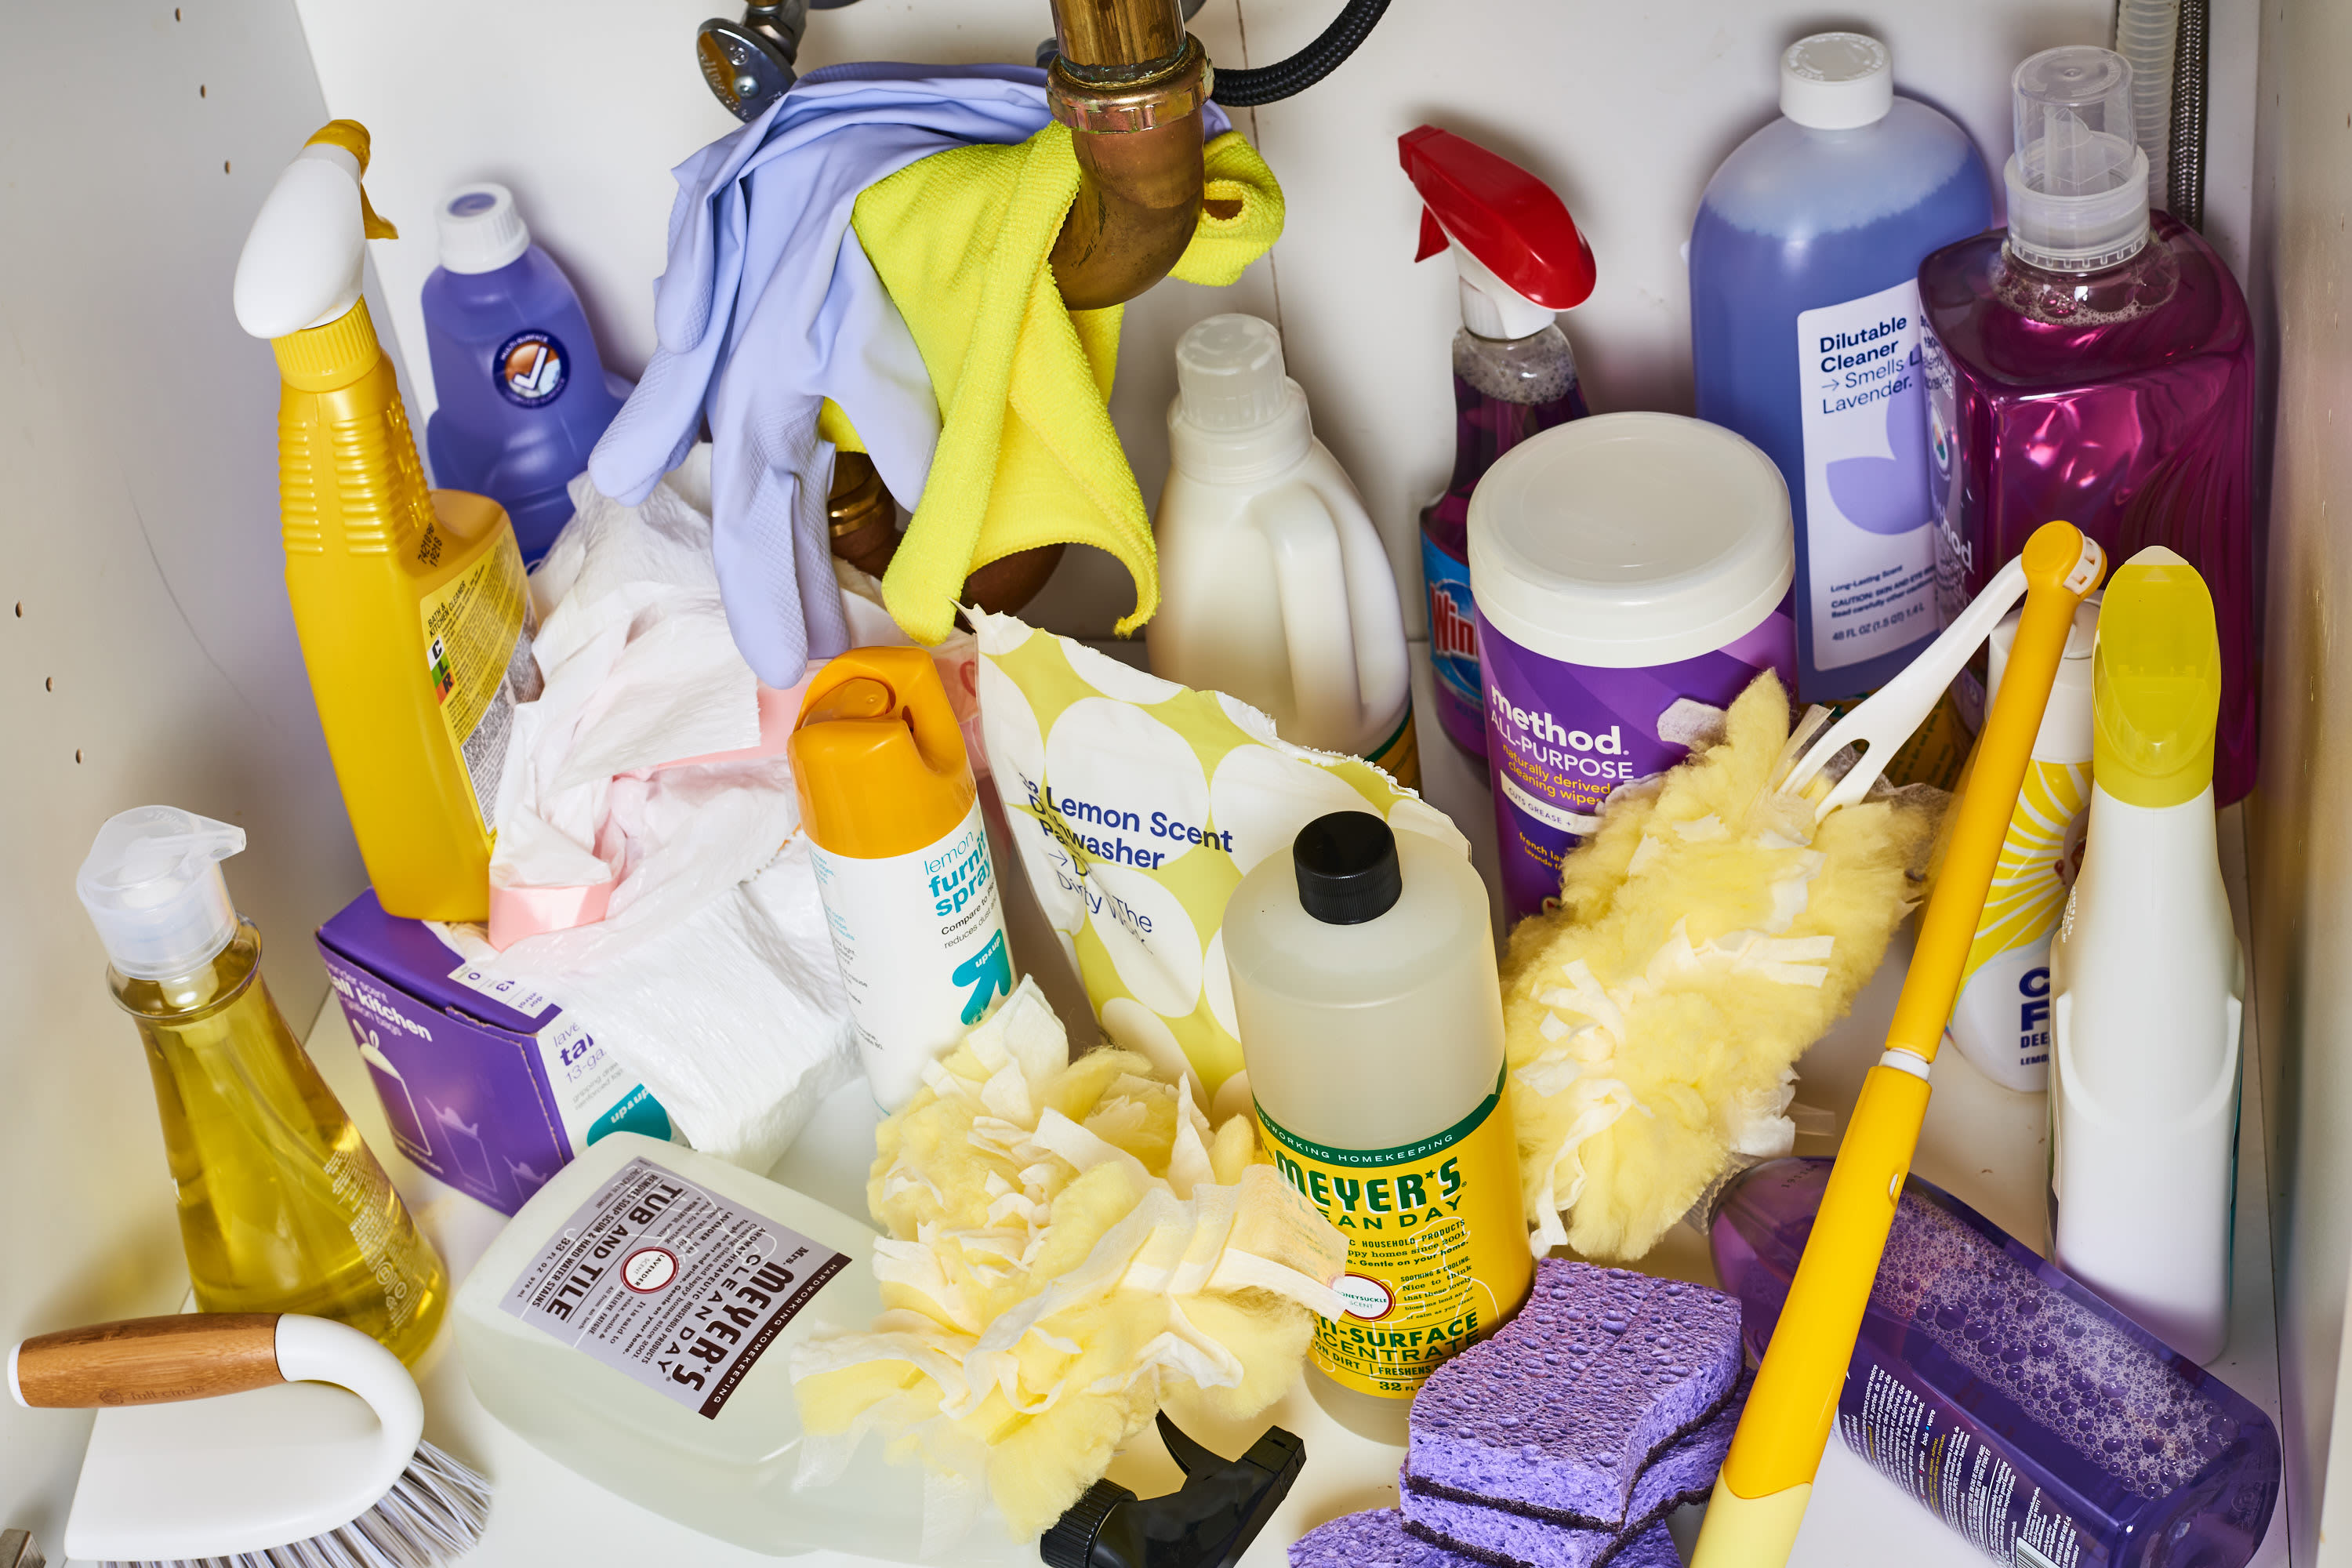 This Helpful Organizer Will Declutter the Space Underneath Your Sink In No  Time